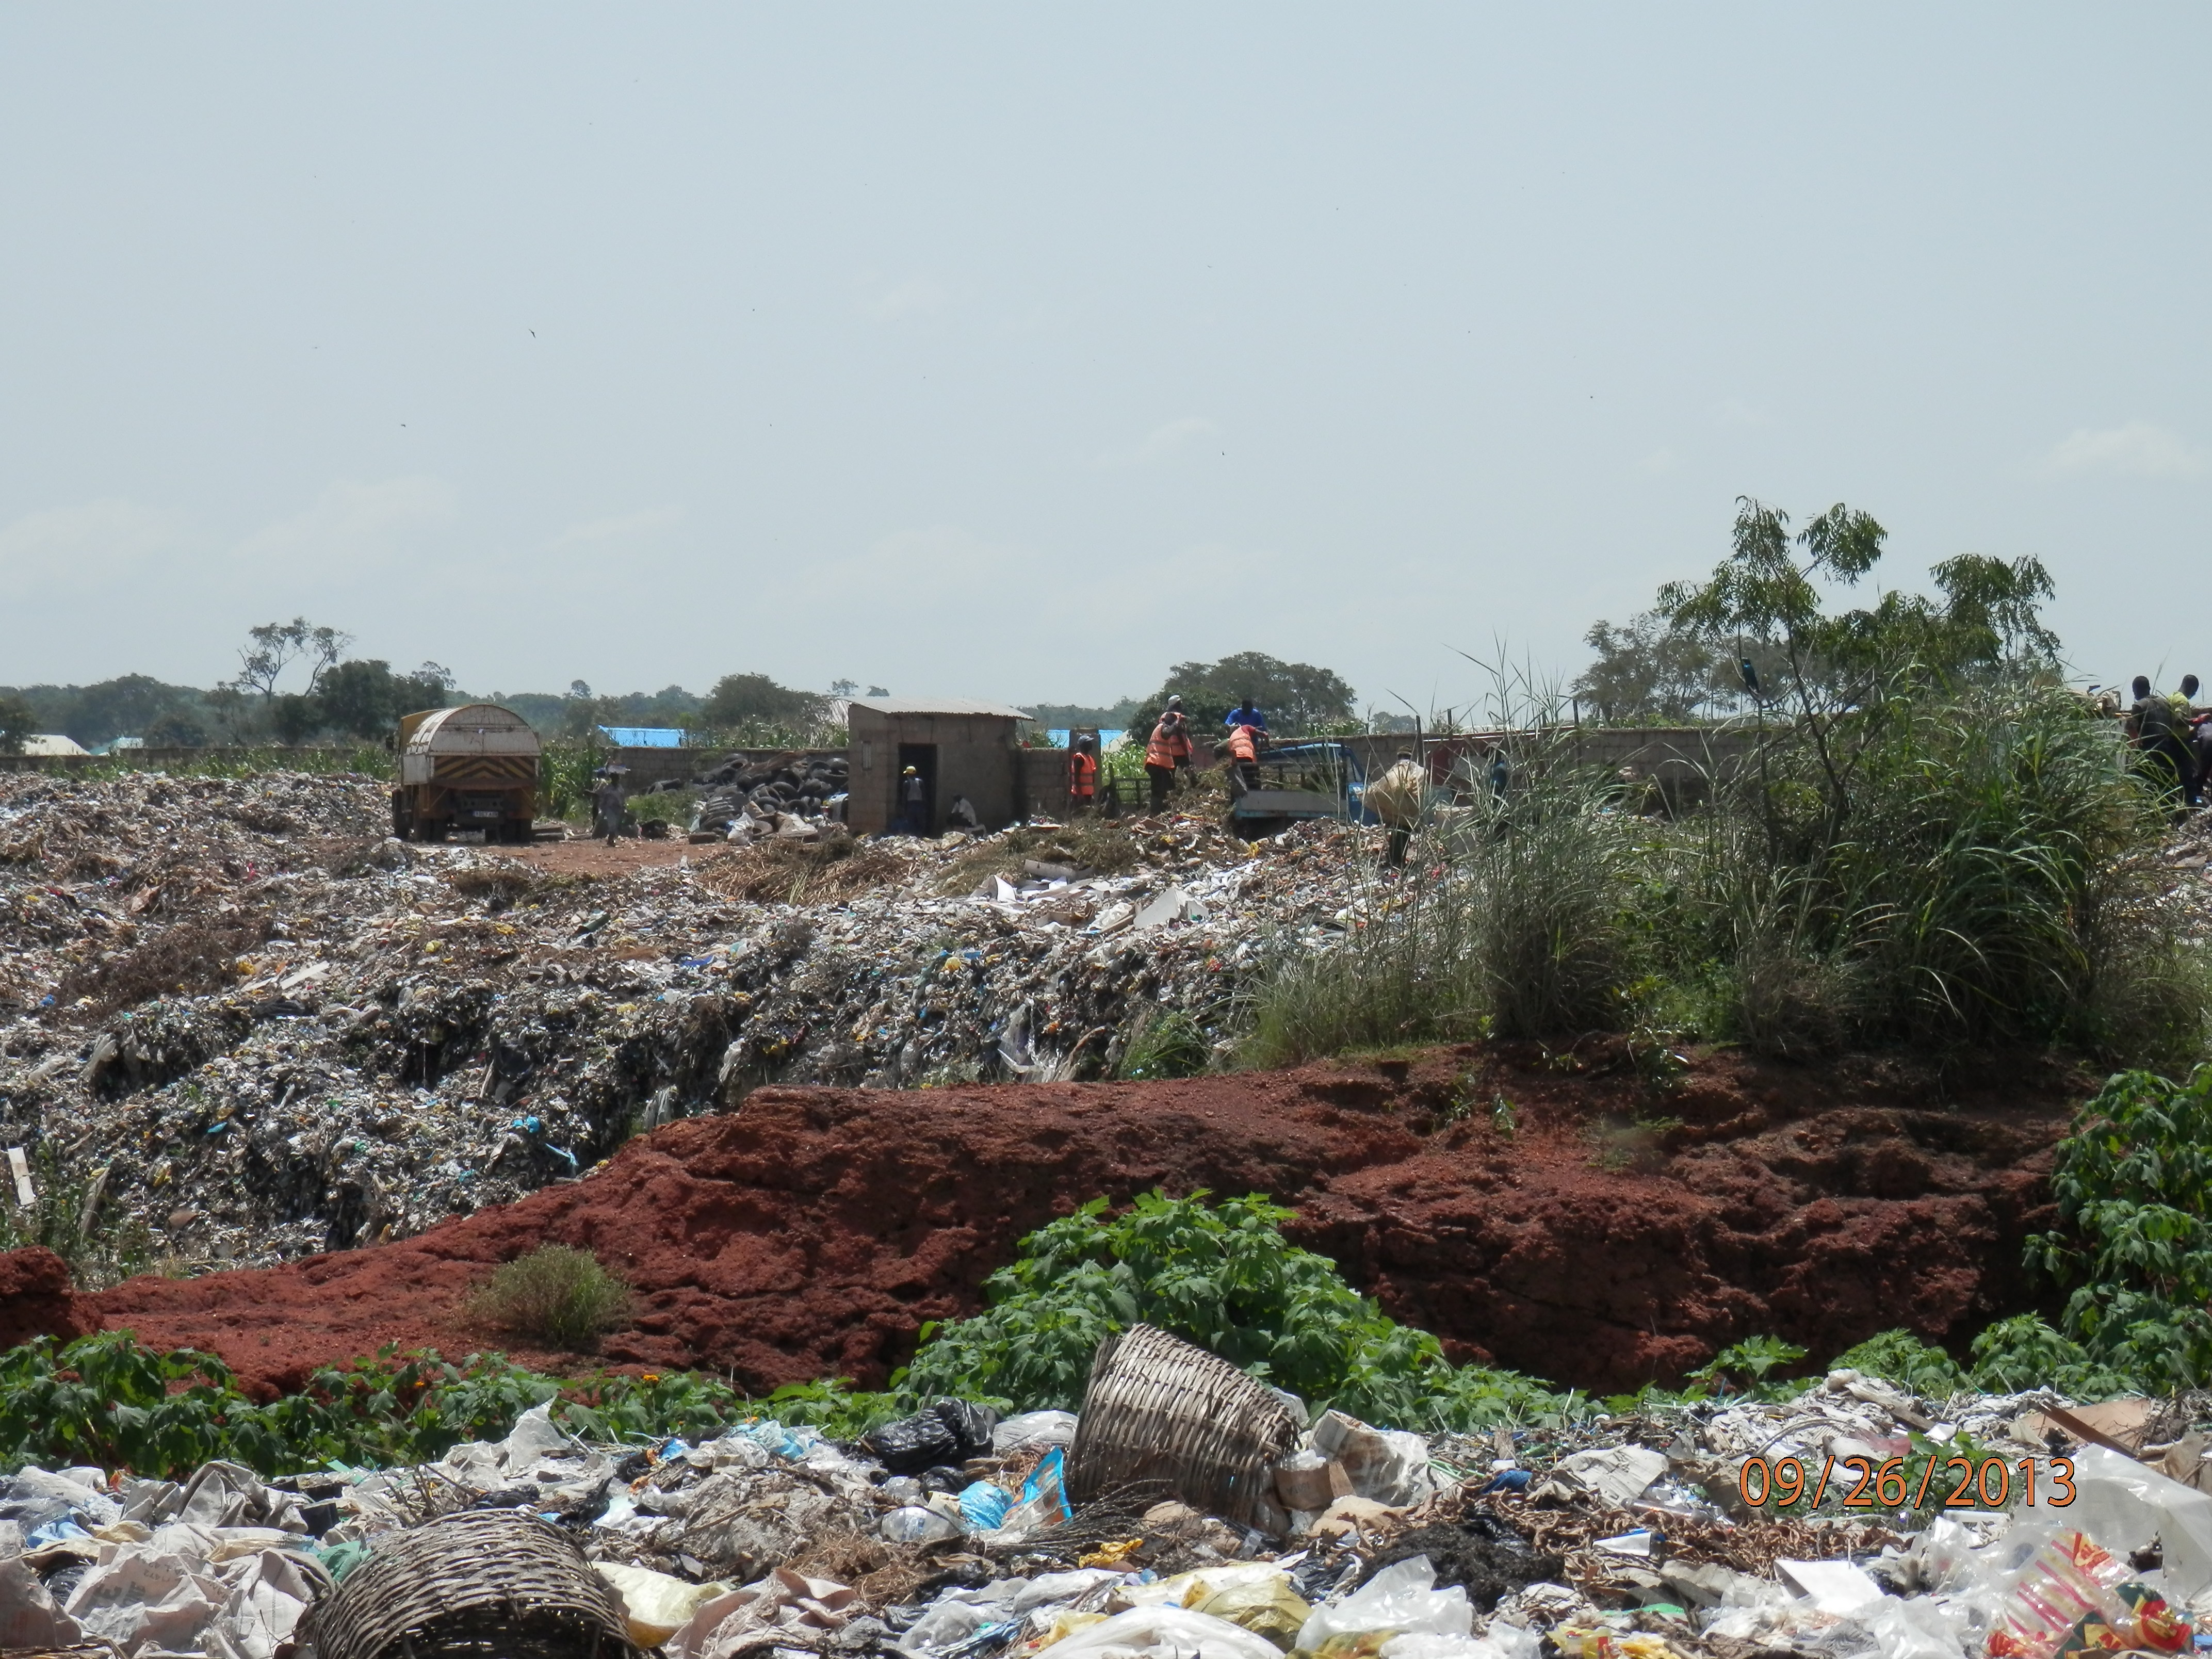 Image from Landfill